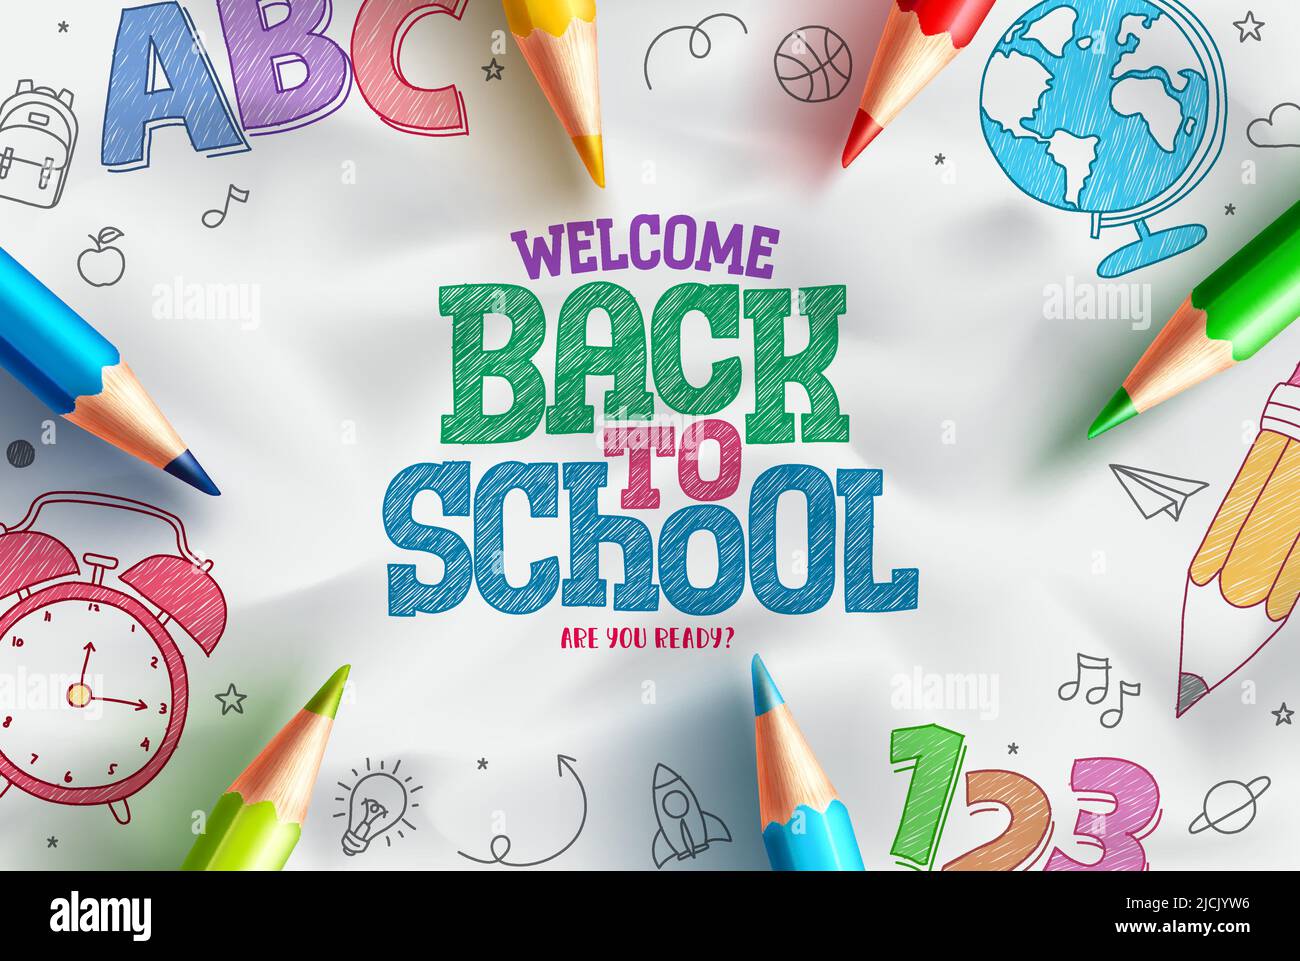 Welcome back text with colorful design elements Vector Image